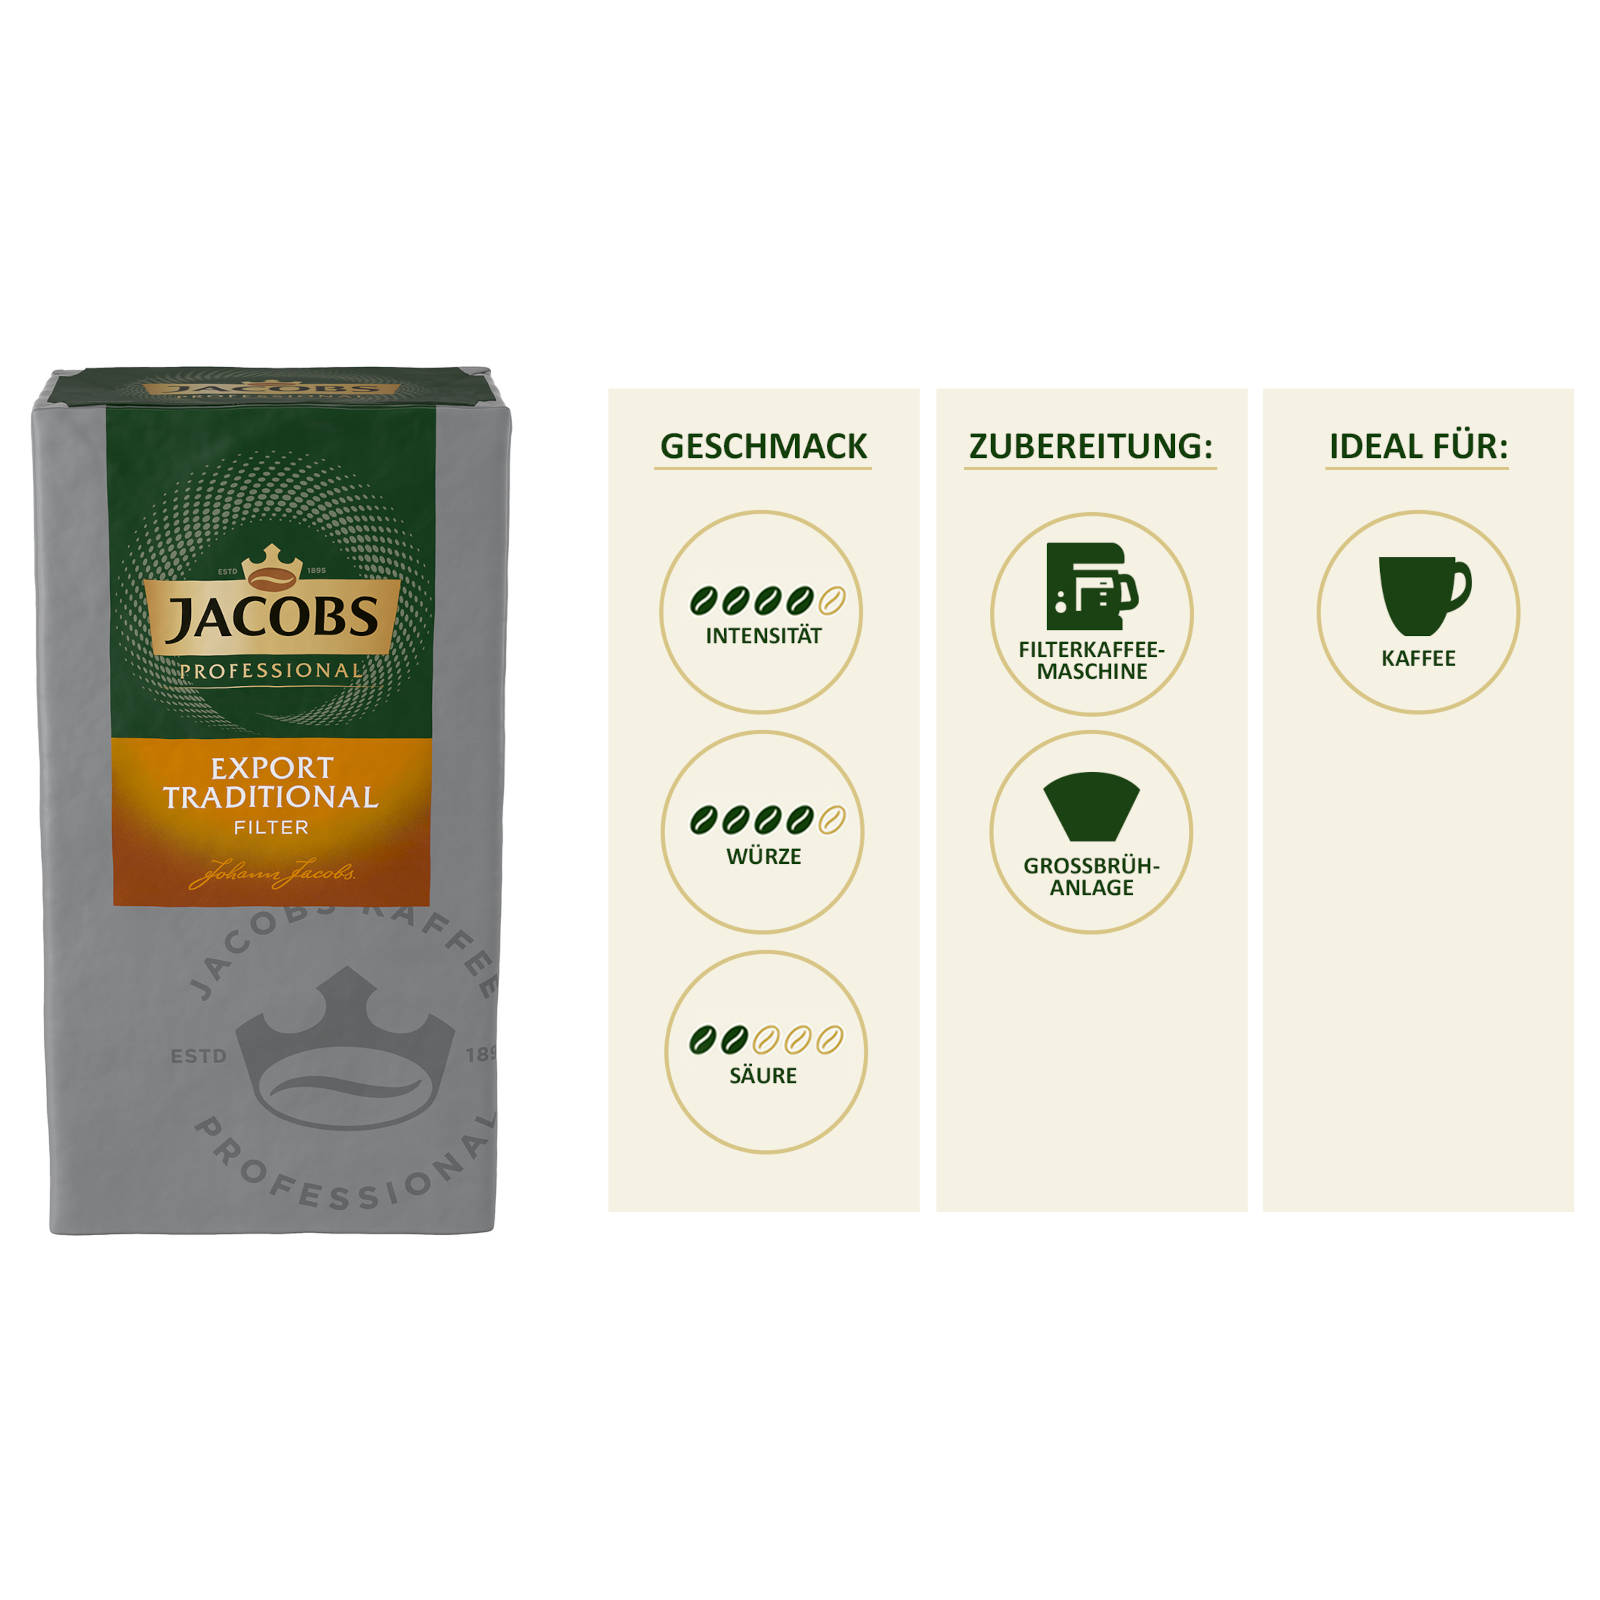 Filterkaffee JACOBS Professional French 12x500 Press) (Filter, g Traditional Export